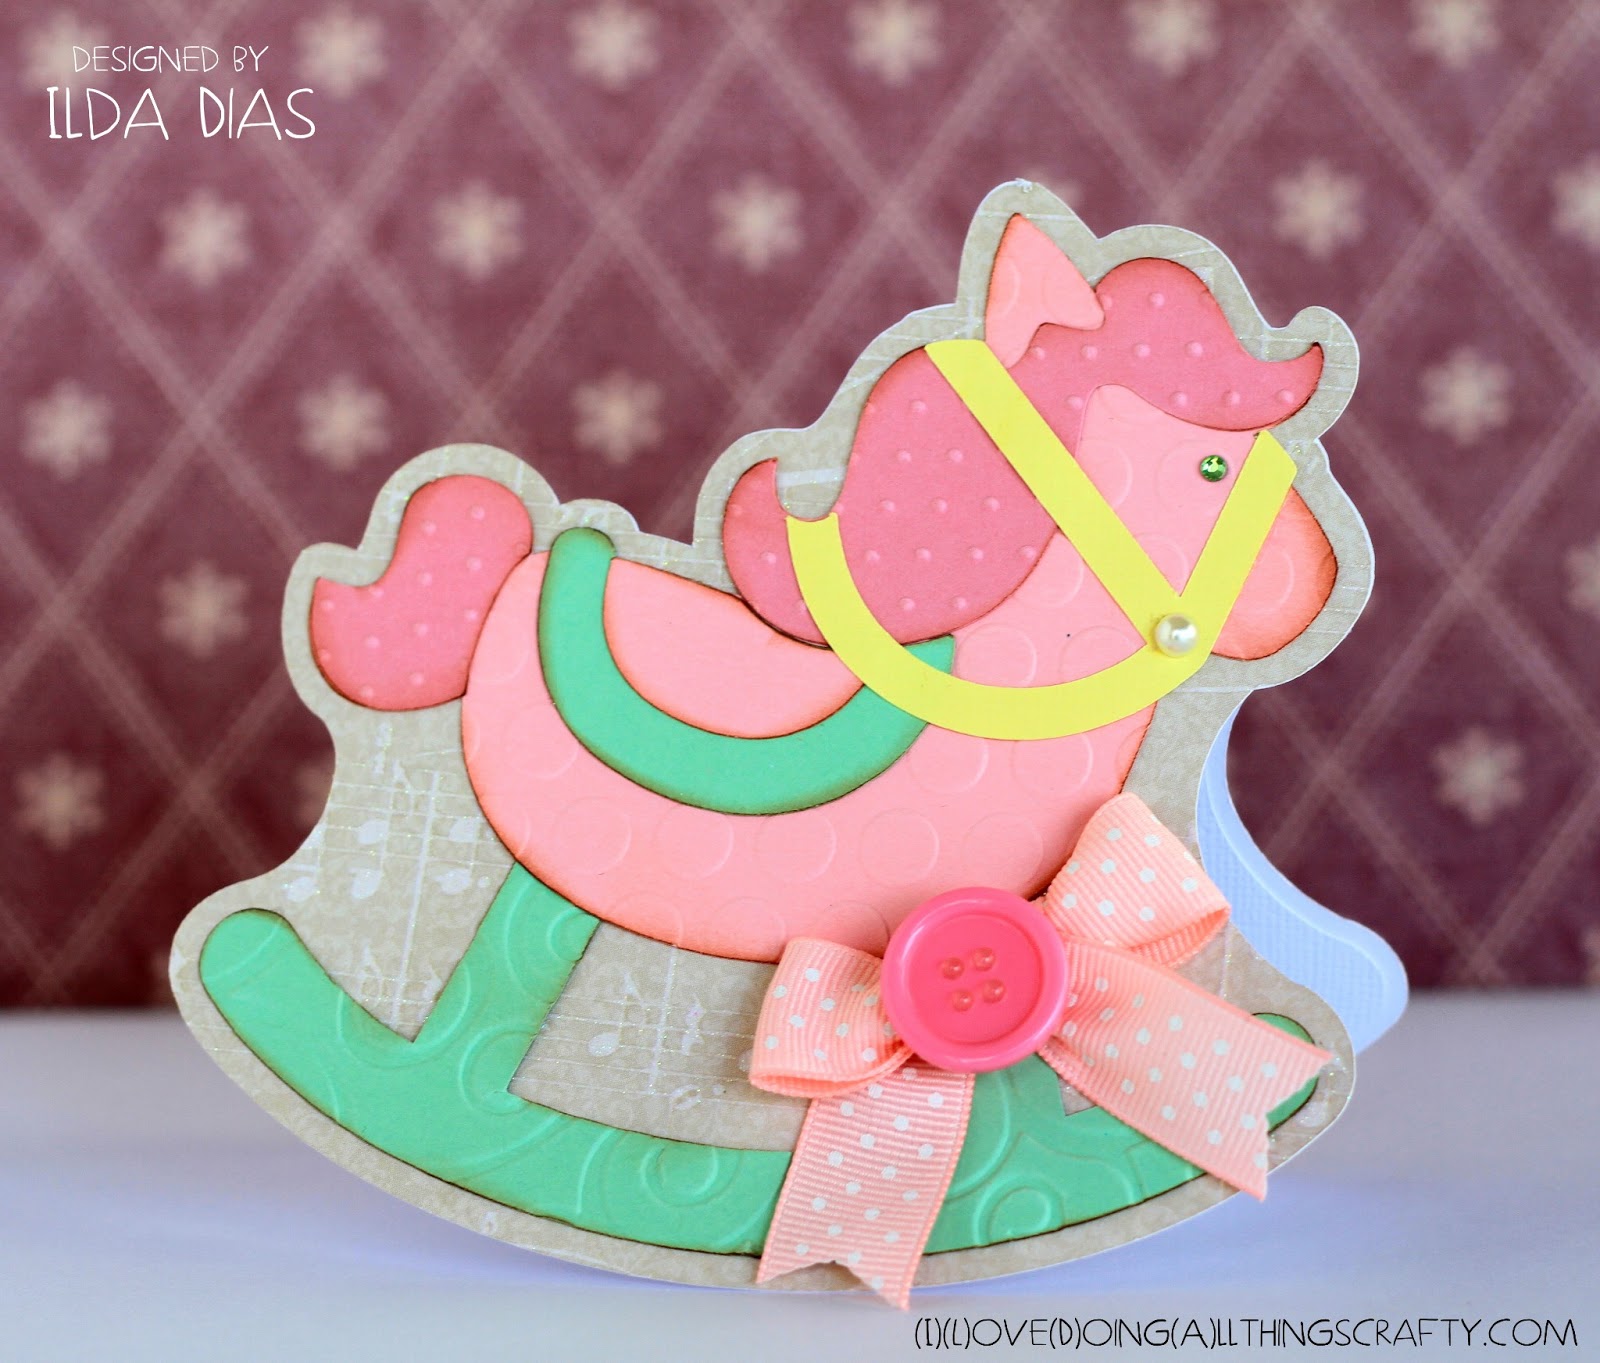 Download I Love Doing All Things Crafty: Rocking Horse Shaped Card